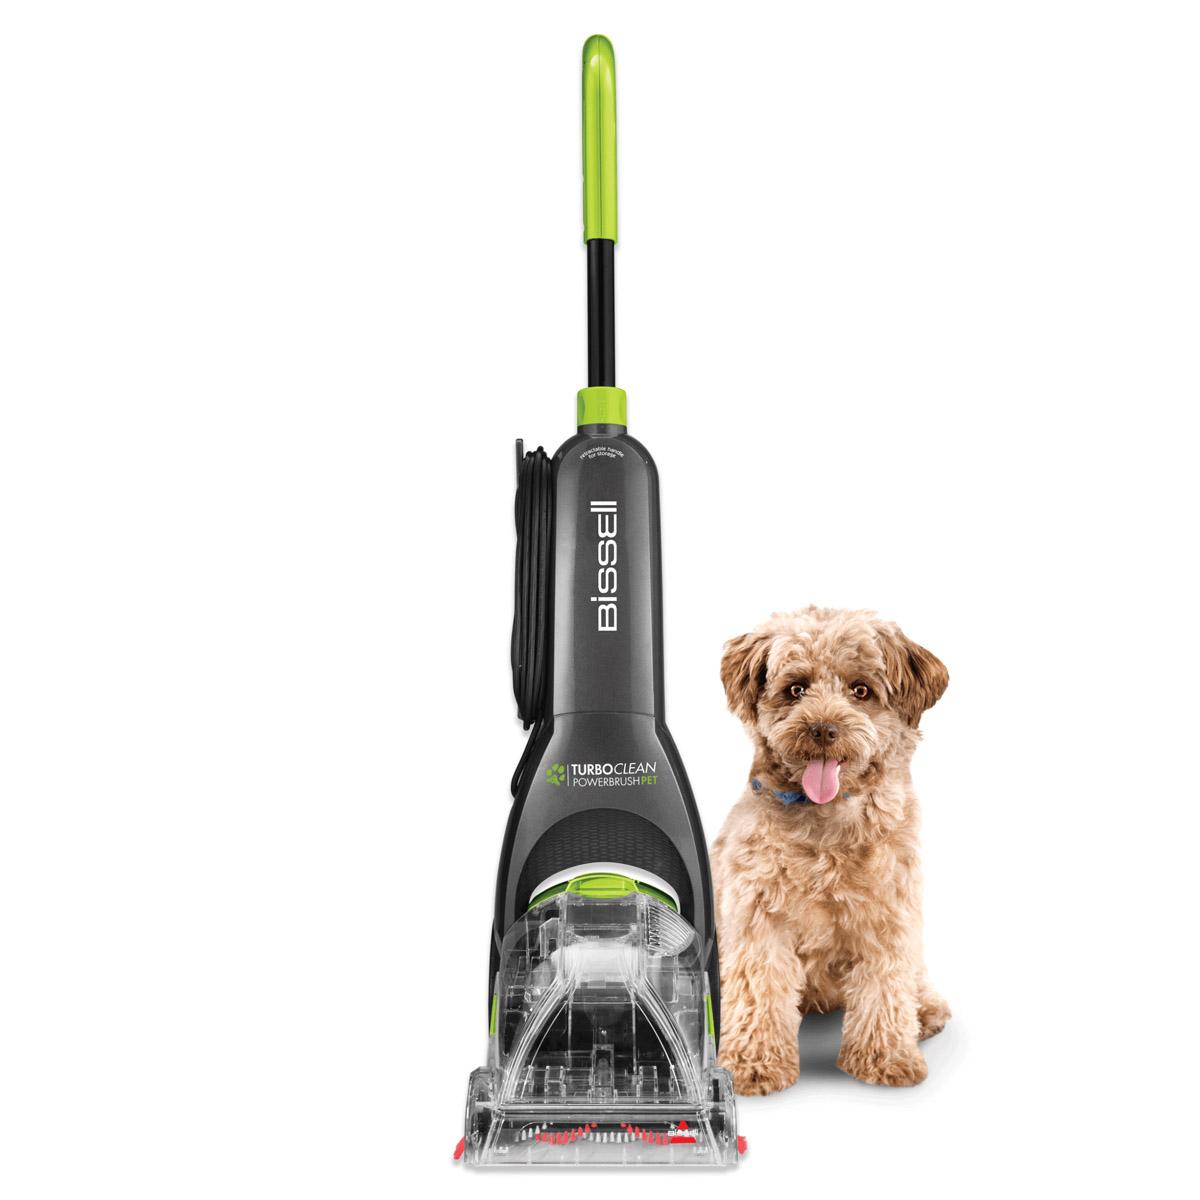 Bissell TurboClean PowerBrush Pet Carpet Cleaner for $69.99 Shipped